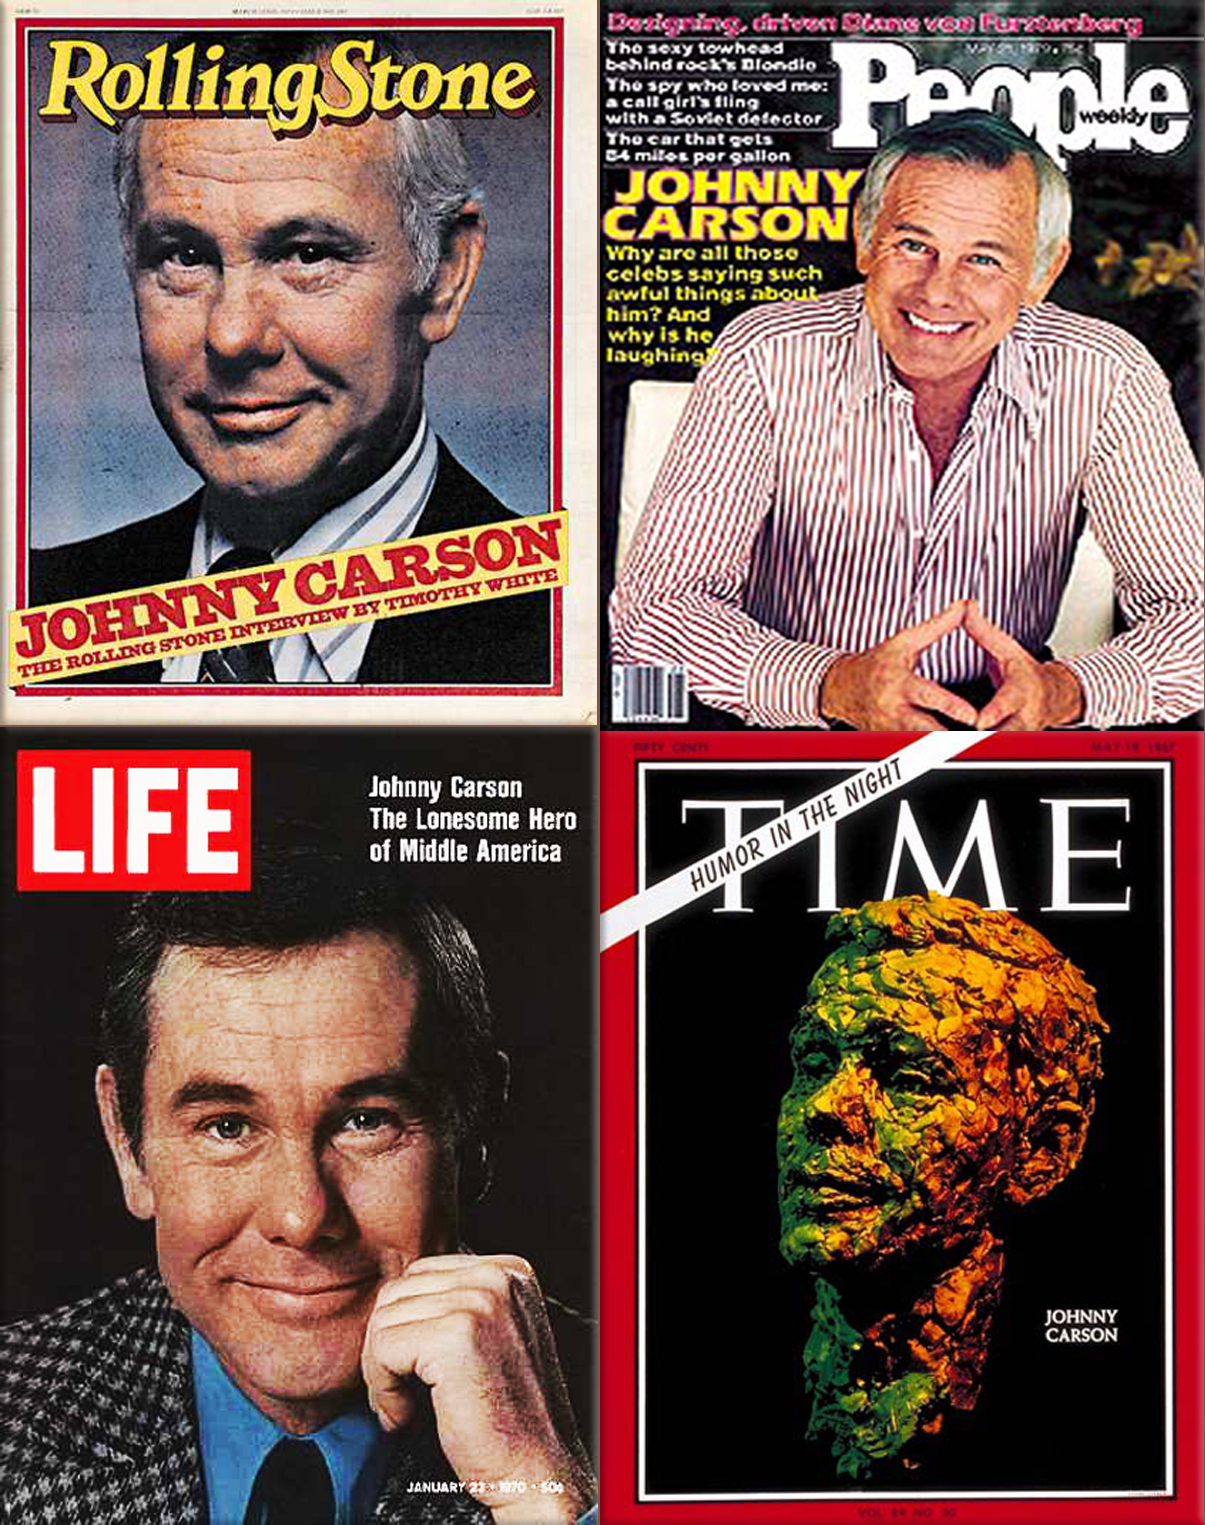 John William 'Johnny' Carson (October 23, 1925 – January 23, 2005) an American television host and comedian, known for thirty years as host of The Tonight Show Starring Johnny Carson (1962–1992).